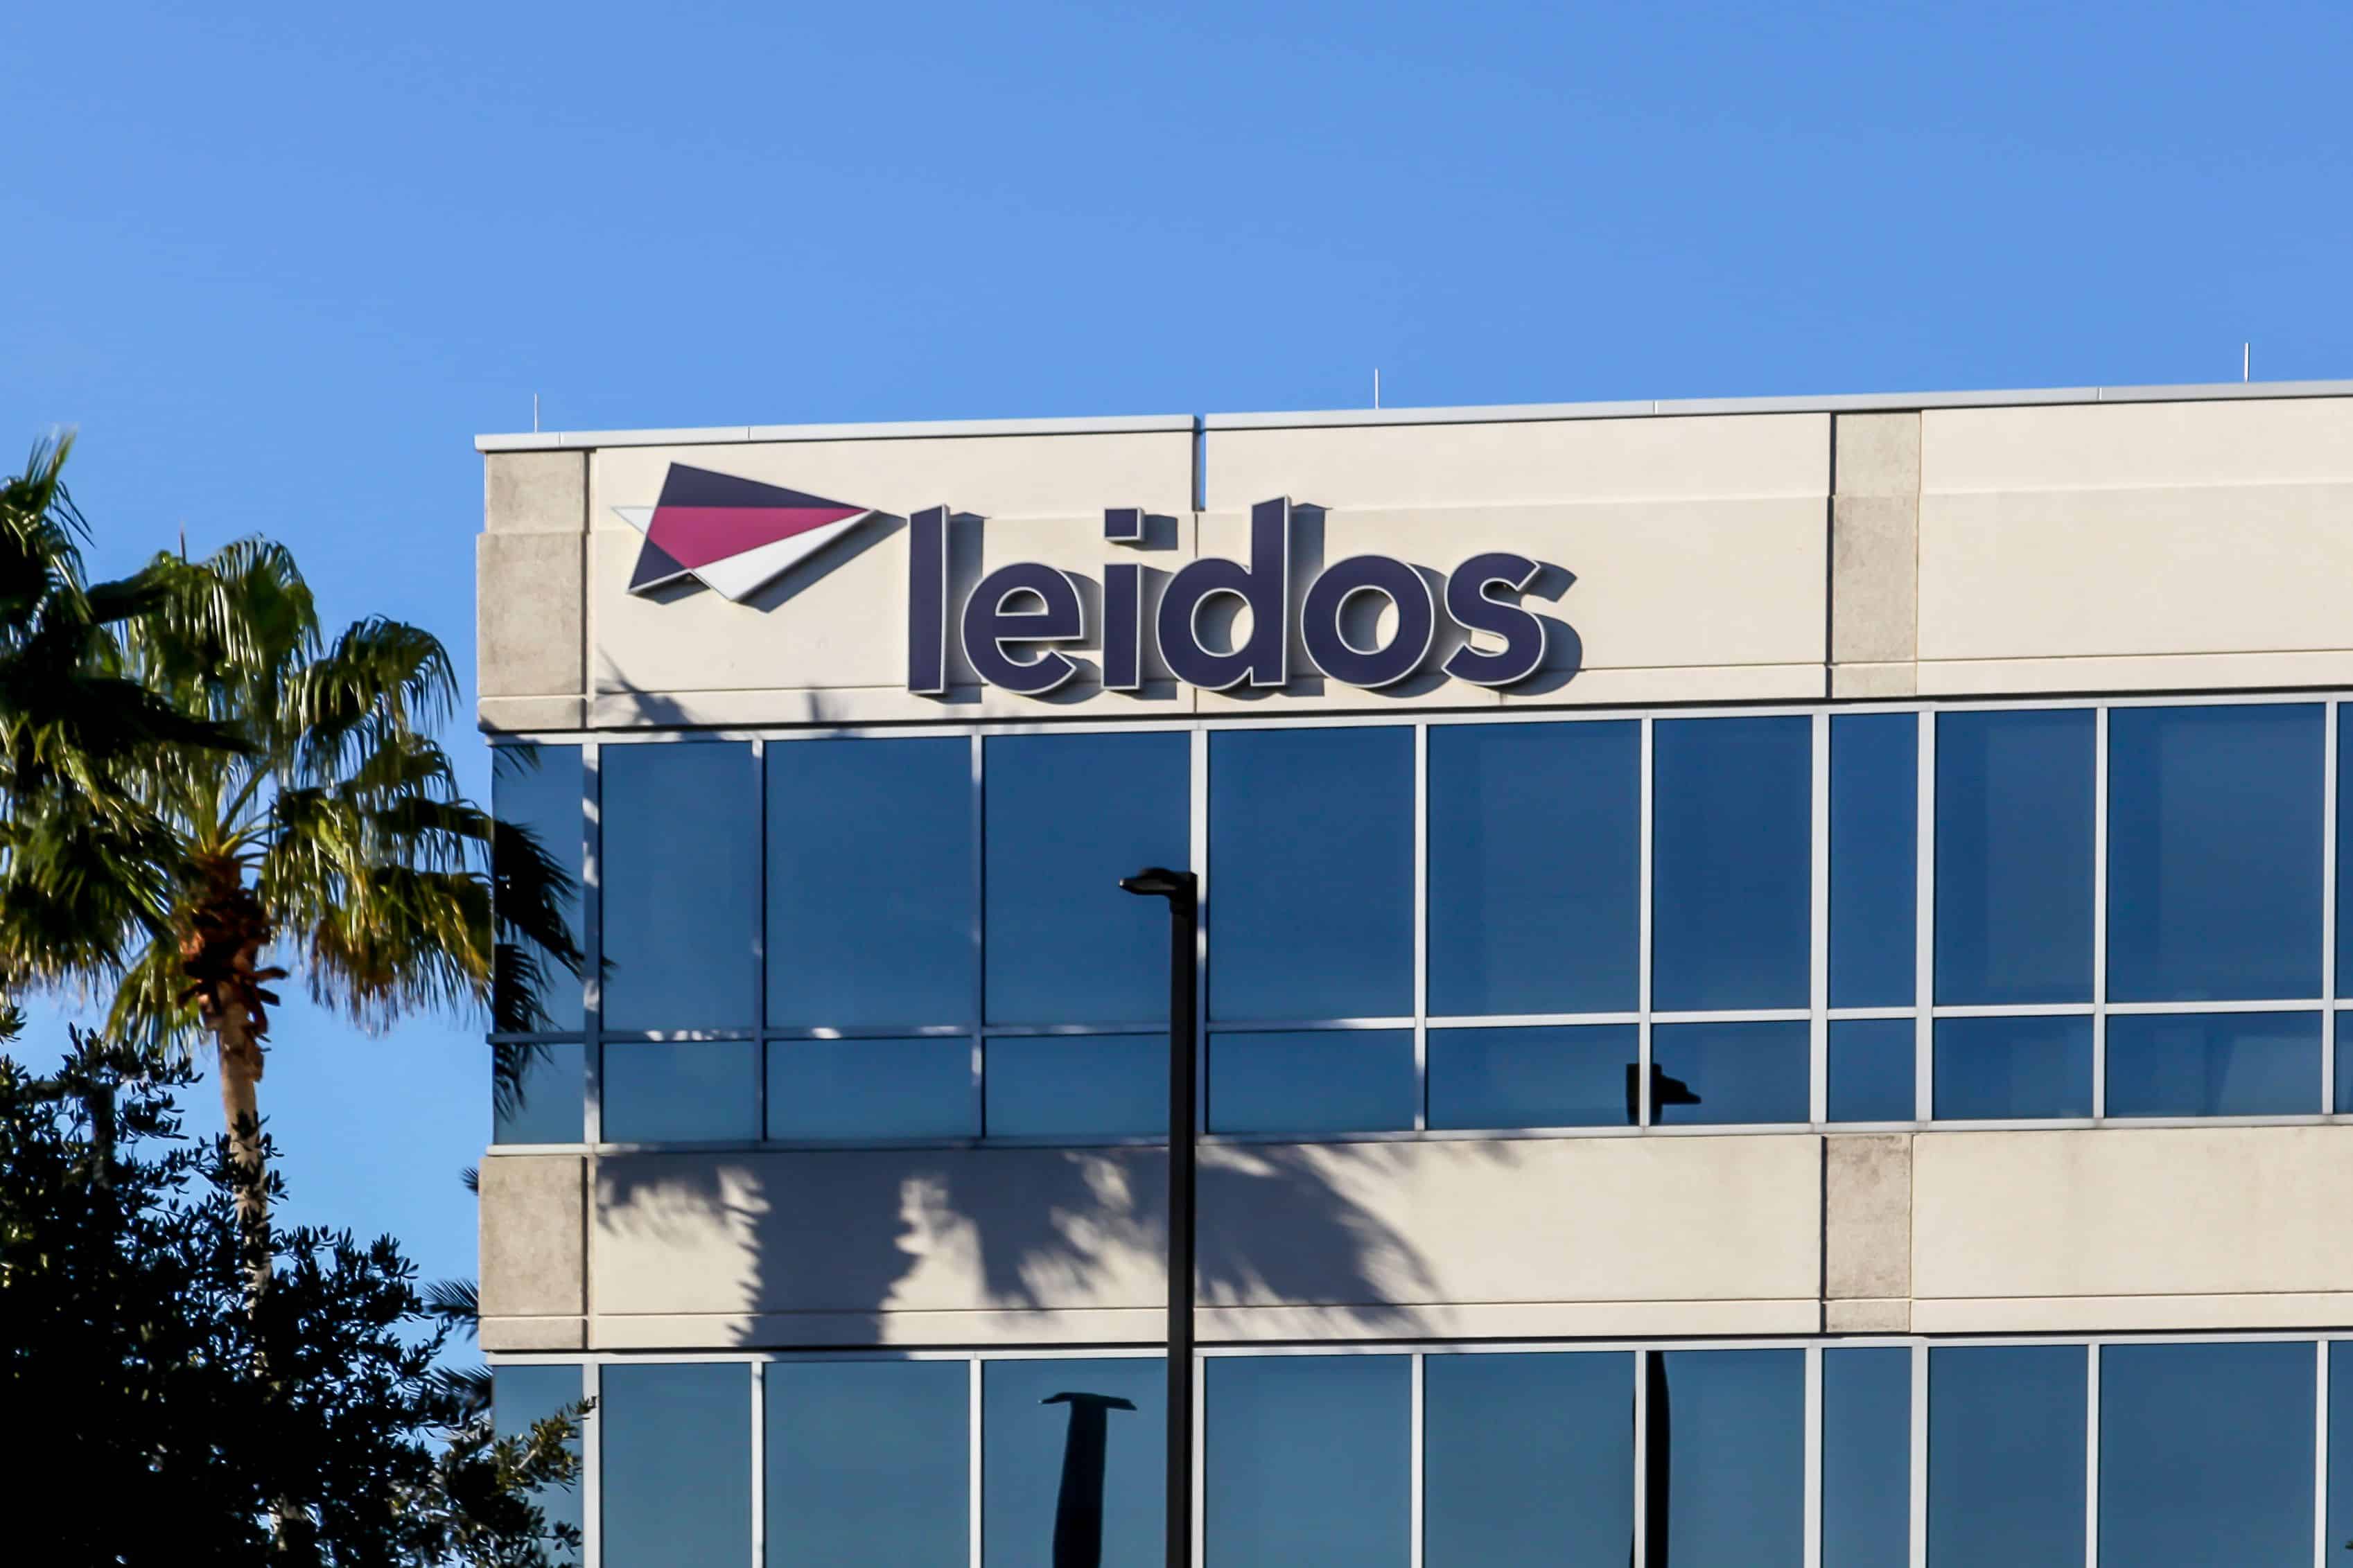 Orlando, Florida, USA - February 8, 2020: Leidos sign at the office building in Orlando, Florida, USA. Leidos is an American defense, aviation, information technology, and biomedical research company.